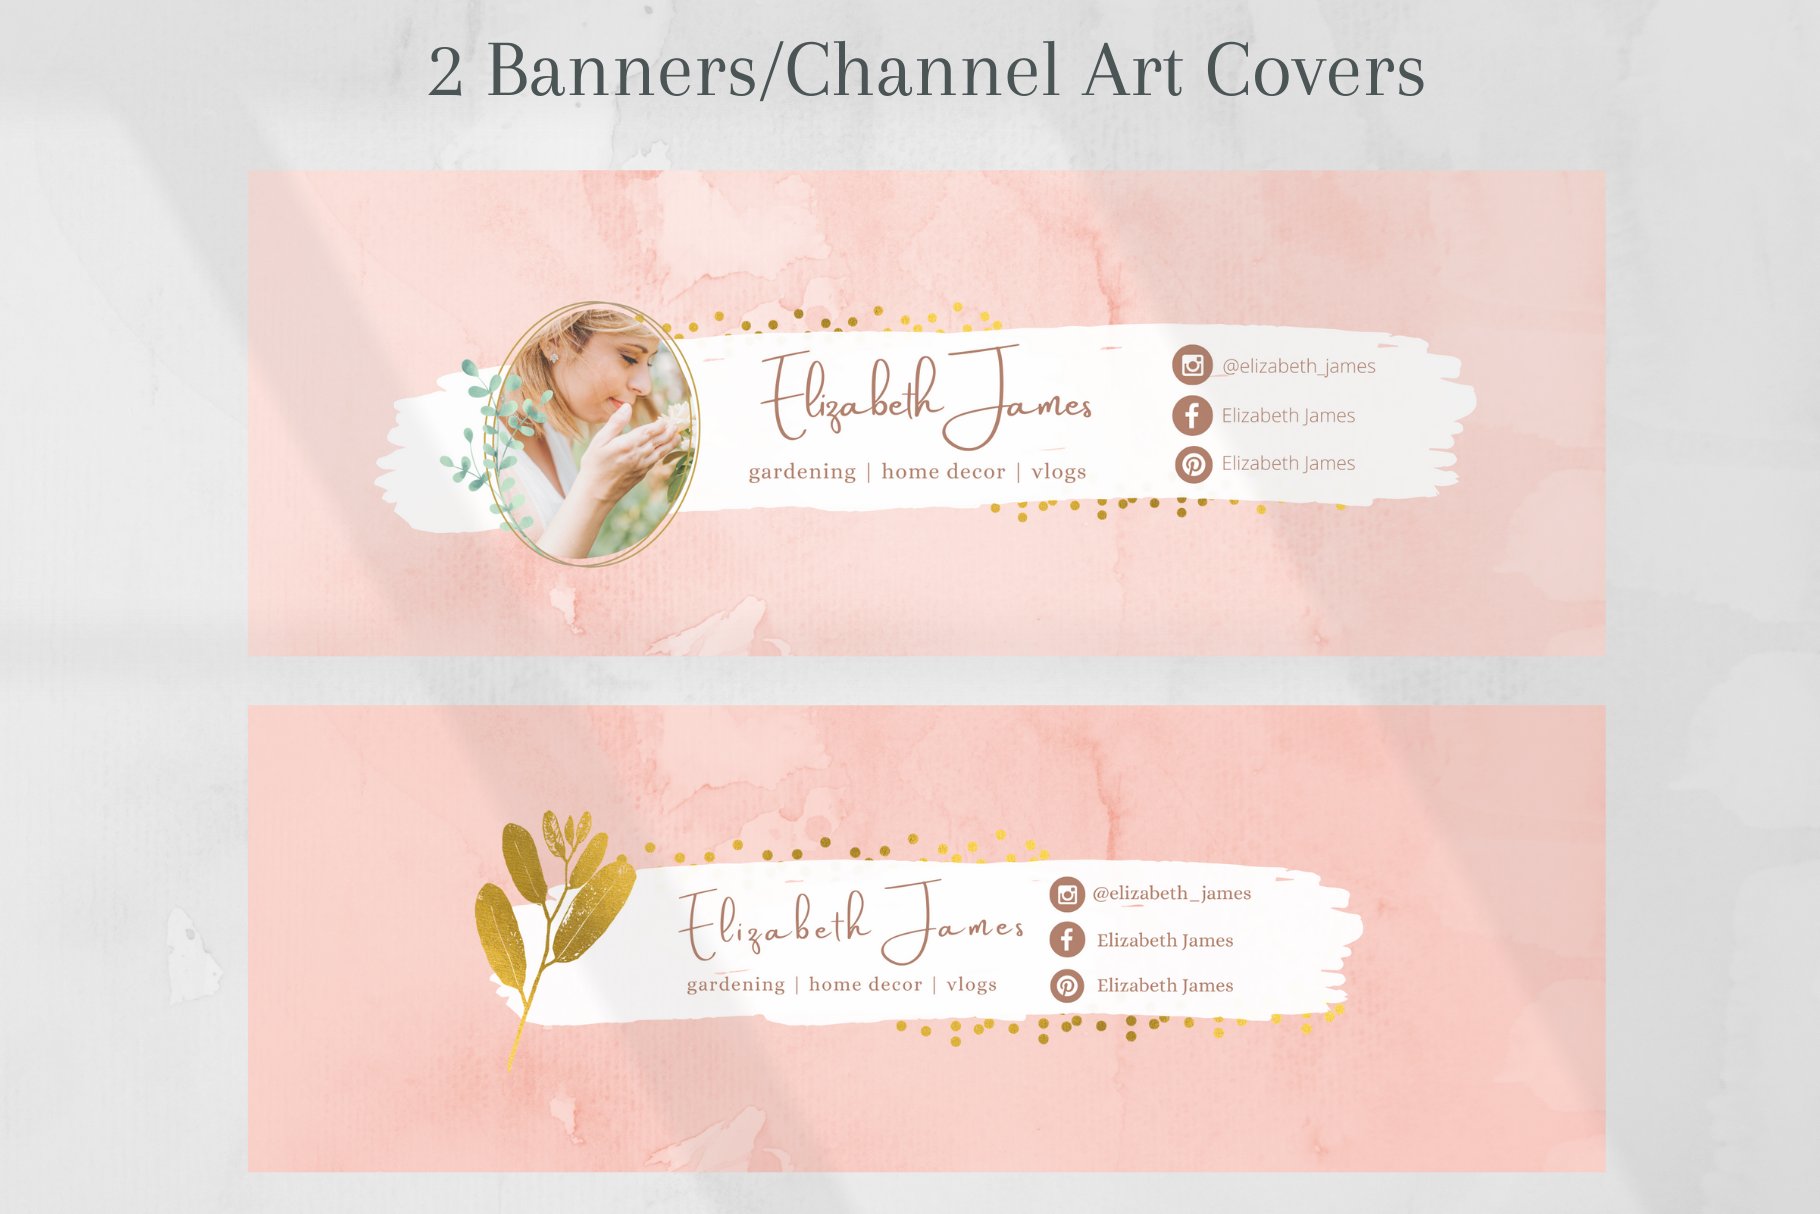 Light pink sections for text and photos.